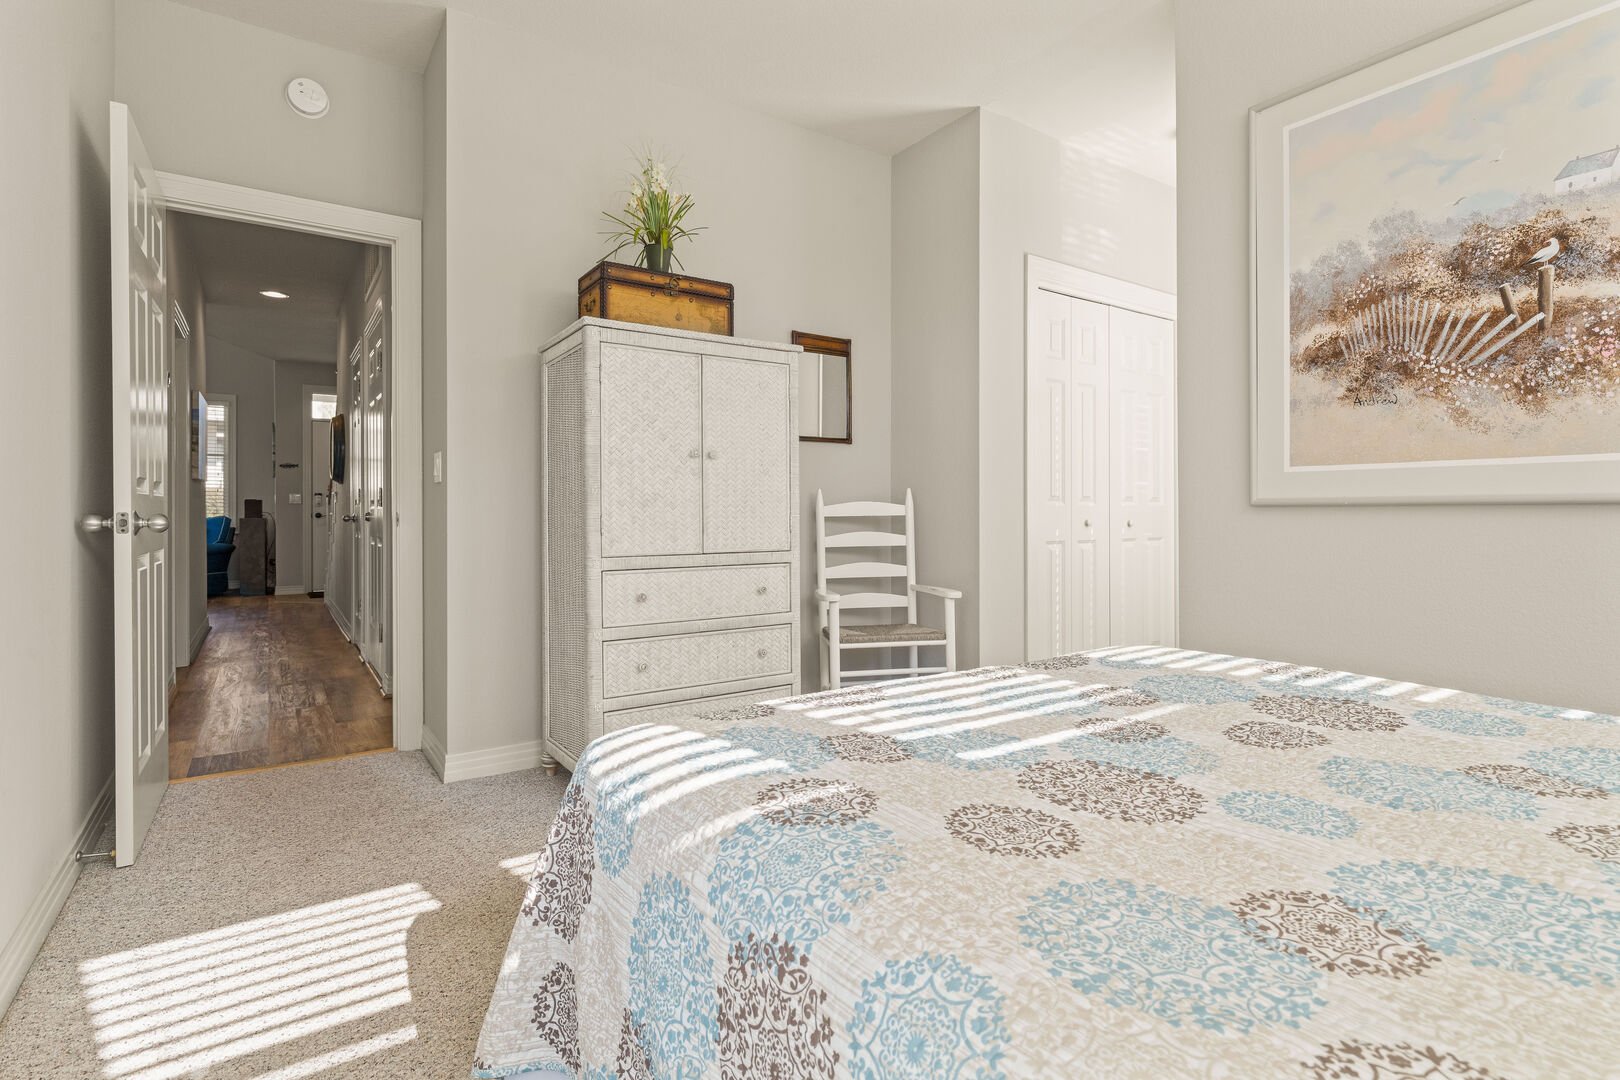 Queen Master Suite - Entry Level